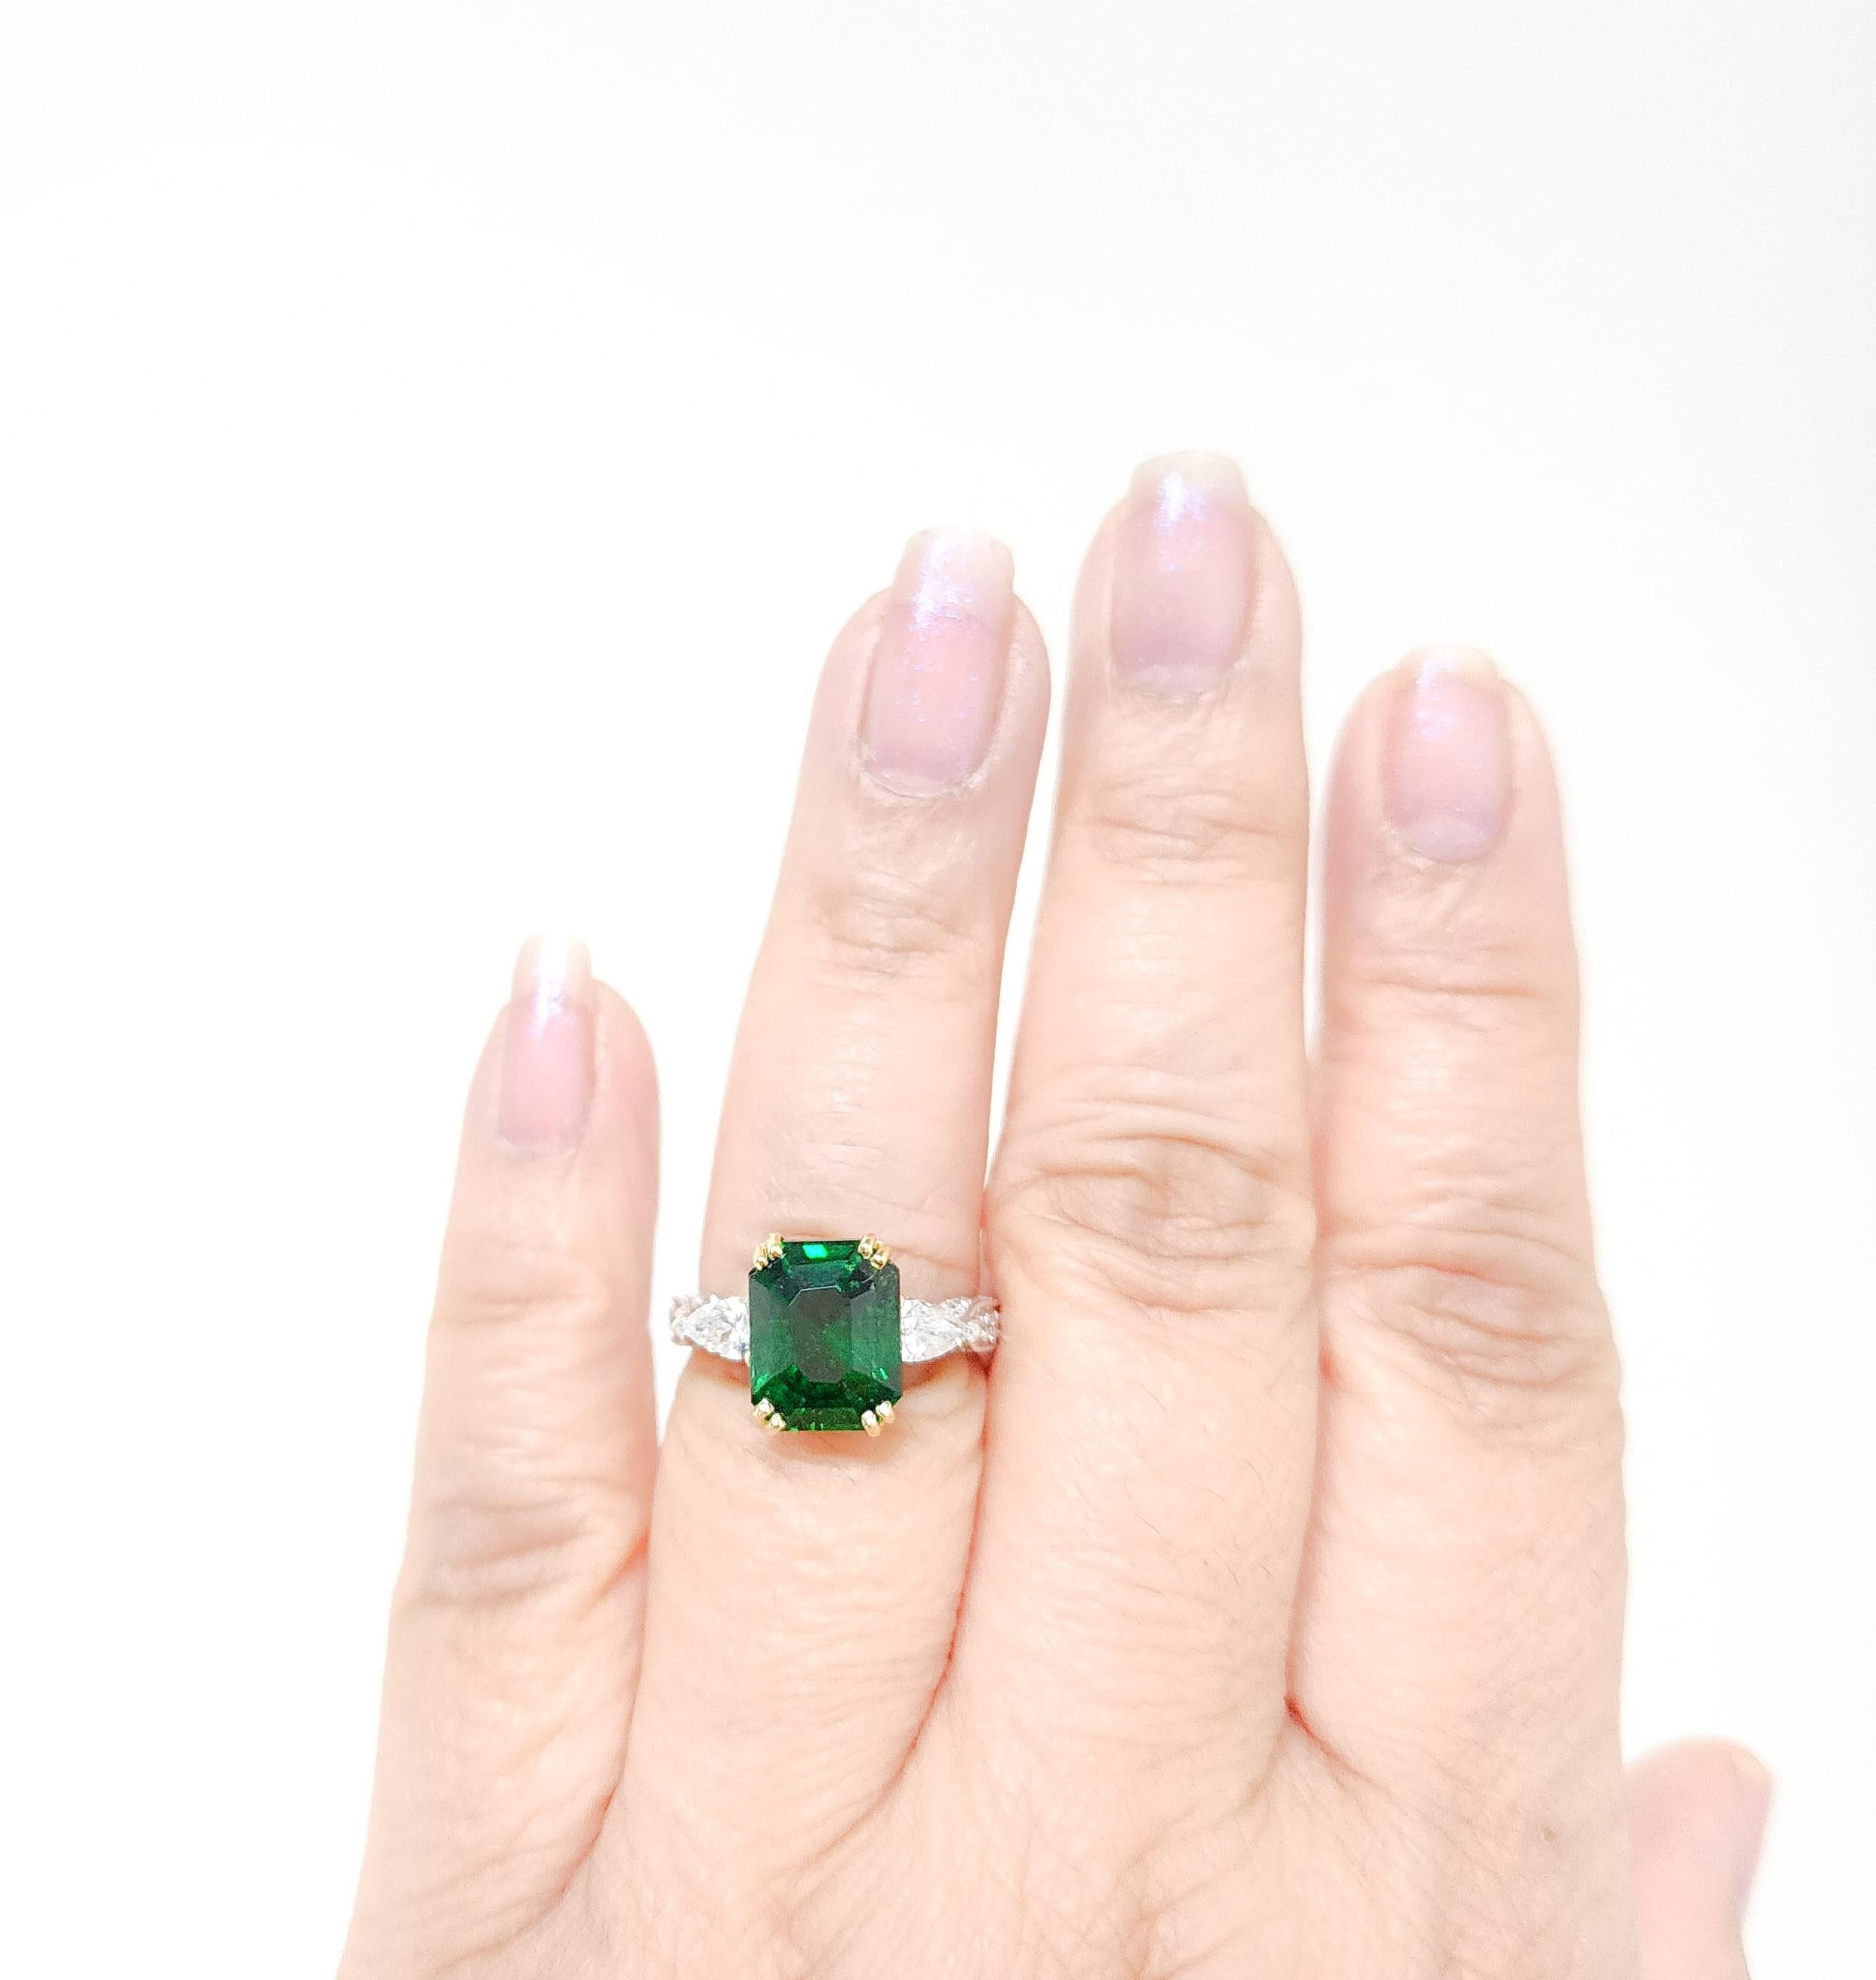 Octagon Cut Tsavorite Garnet and White Diamond Ring in 18k White and Yellow Gold For Sale